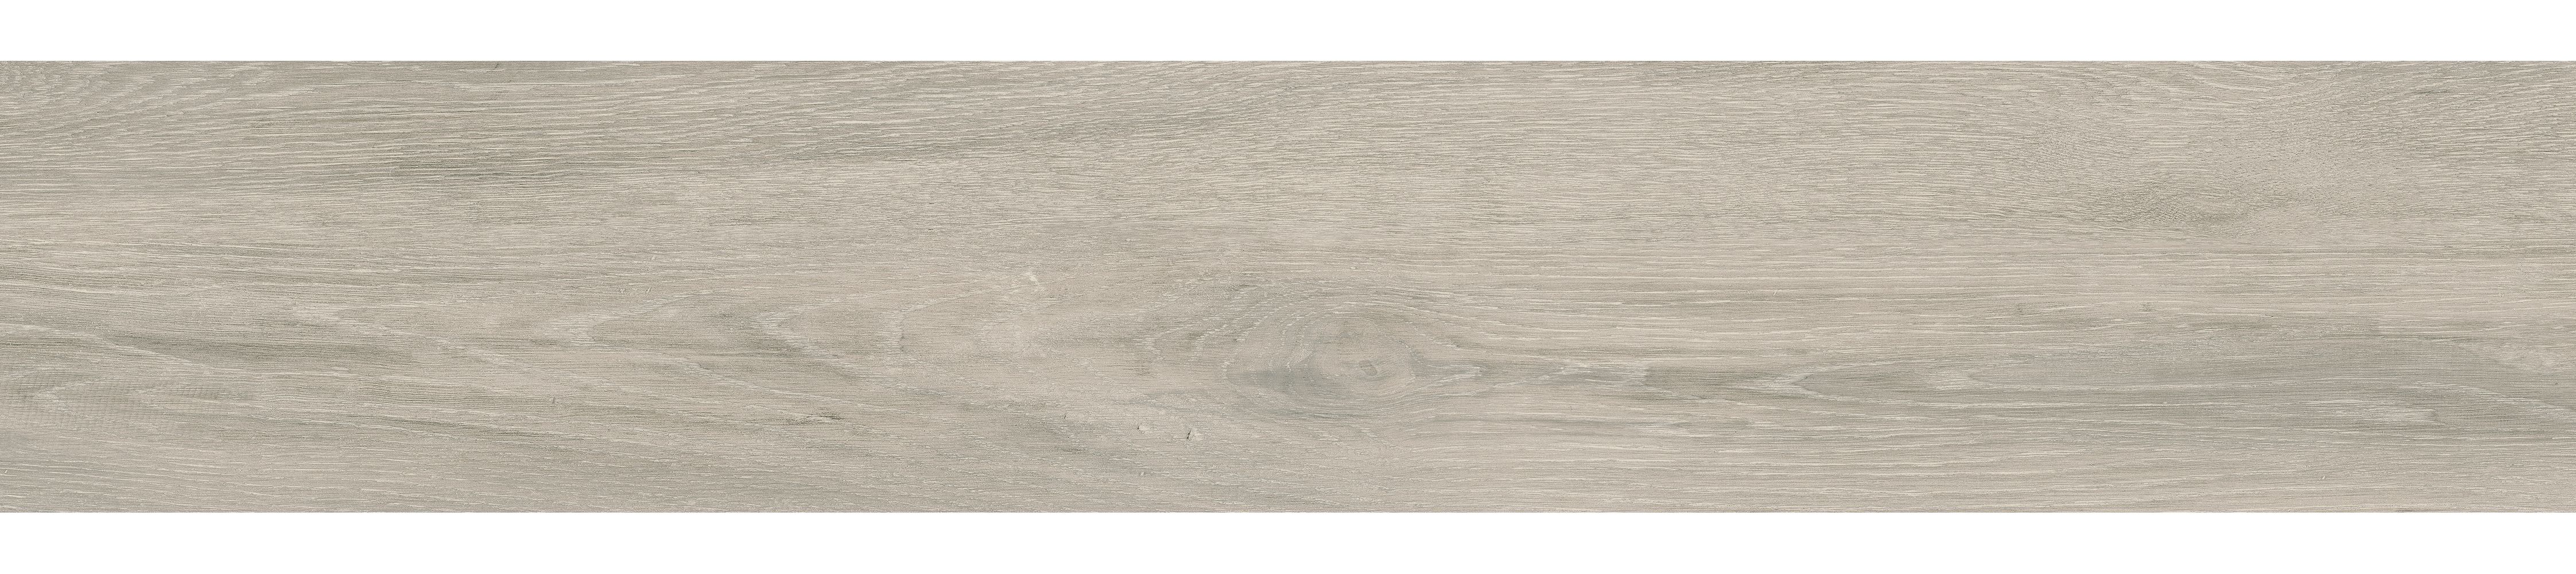 Image of Wickes Boutique Maryland Grey Glazed Porcelain Wood Effect Wall & Floor Tile - 1140 x 200mm